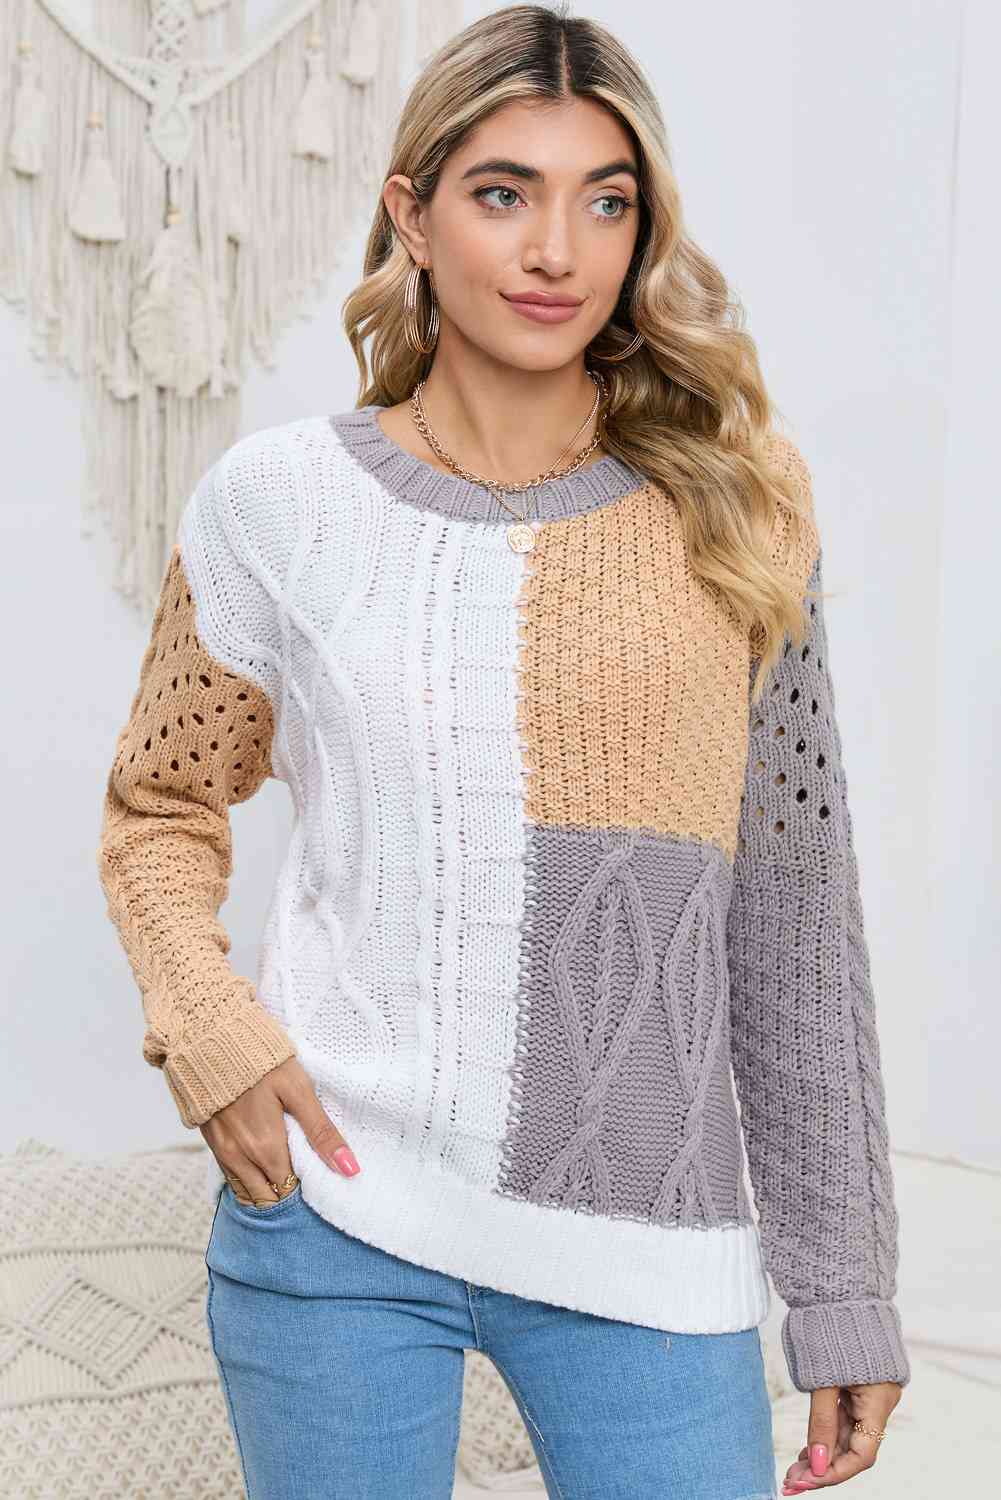 Light Gray Cable-Knit Openwork Round Neck Color Block Sweater Sentient Beauty Fashions Apparel & Accessories